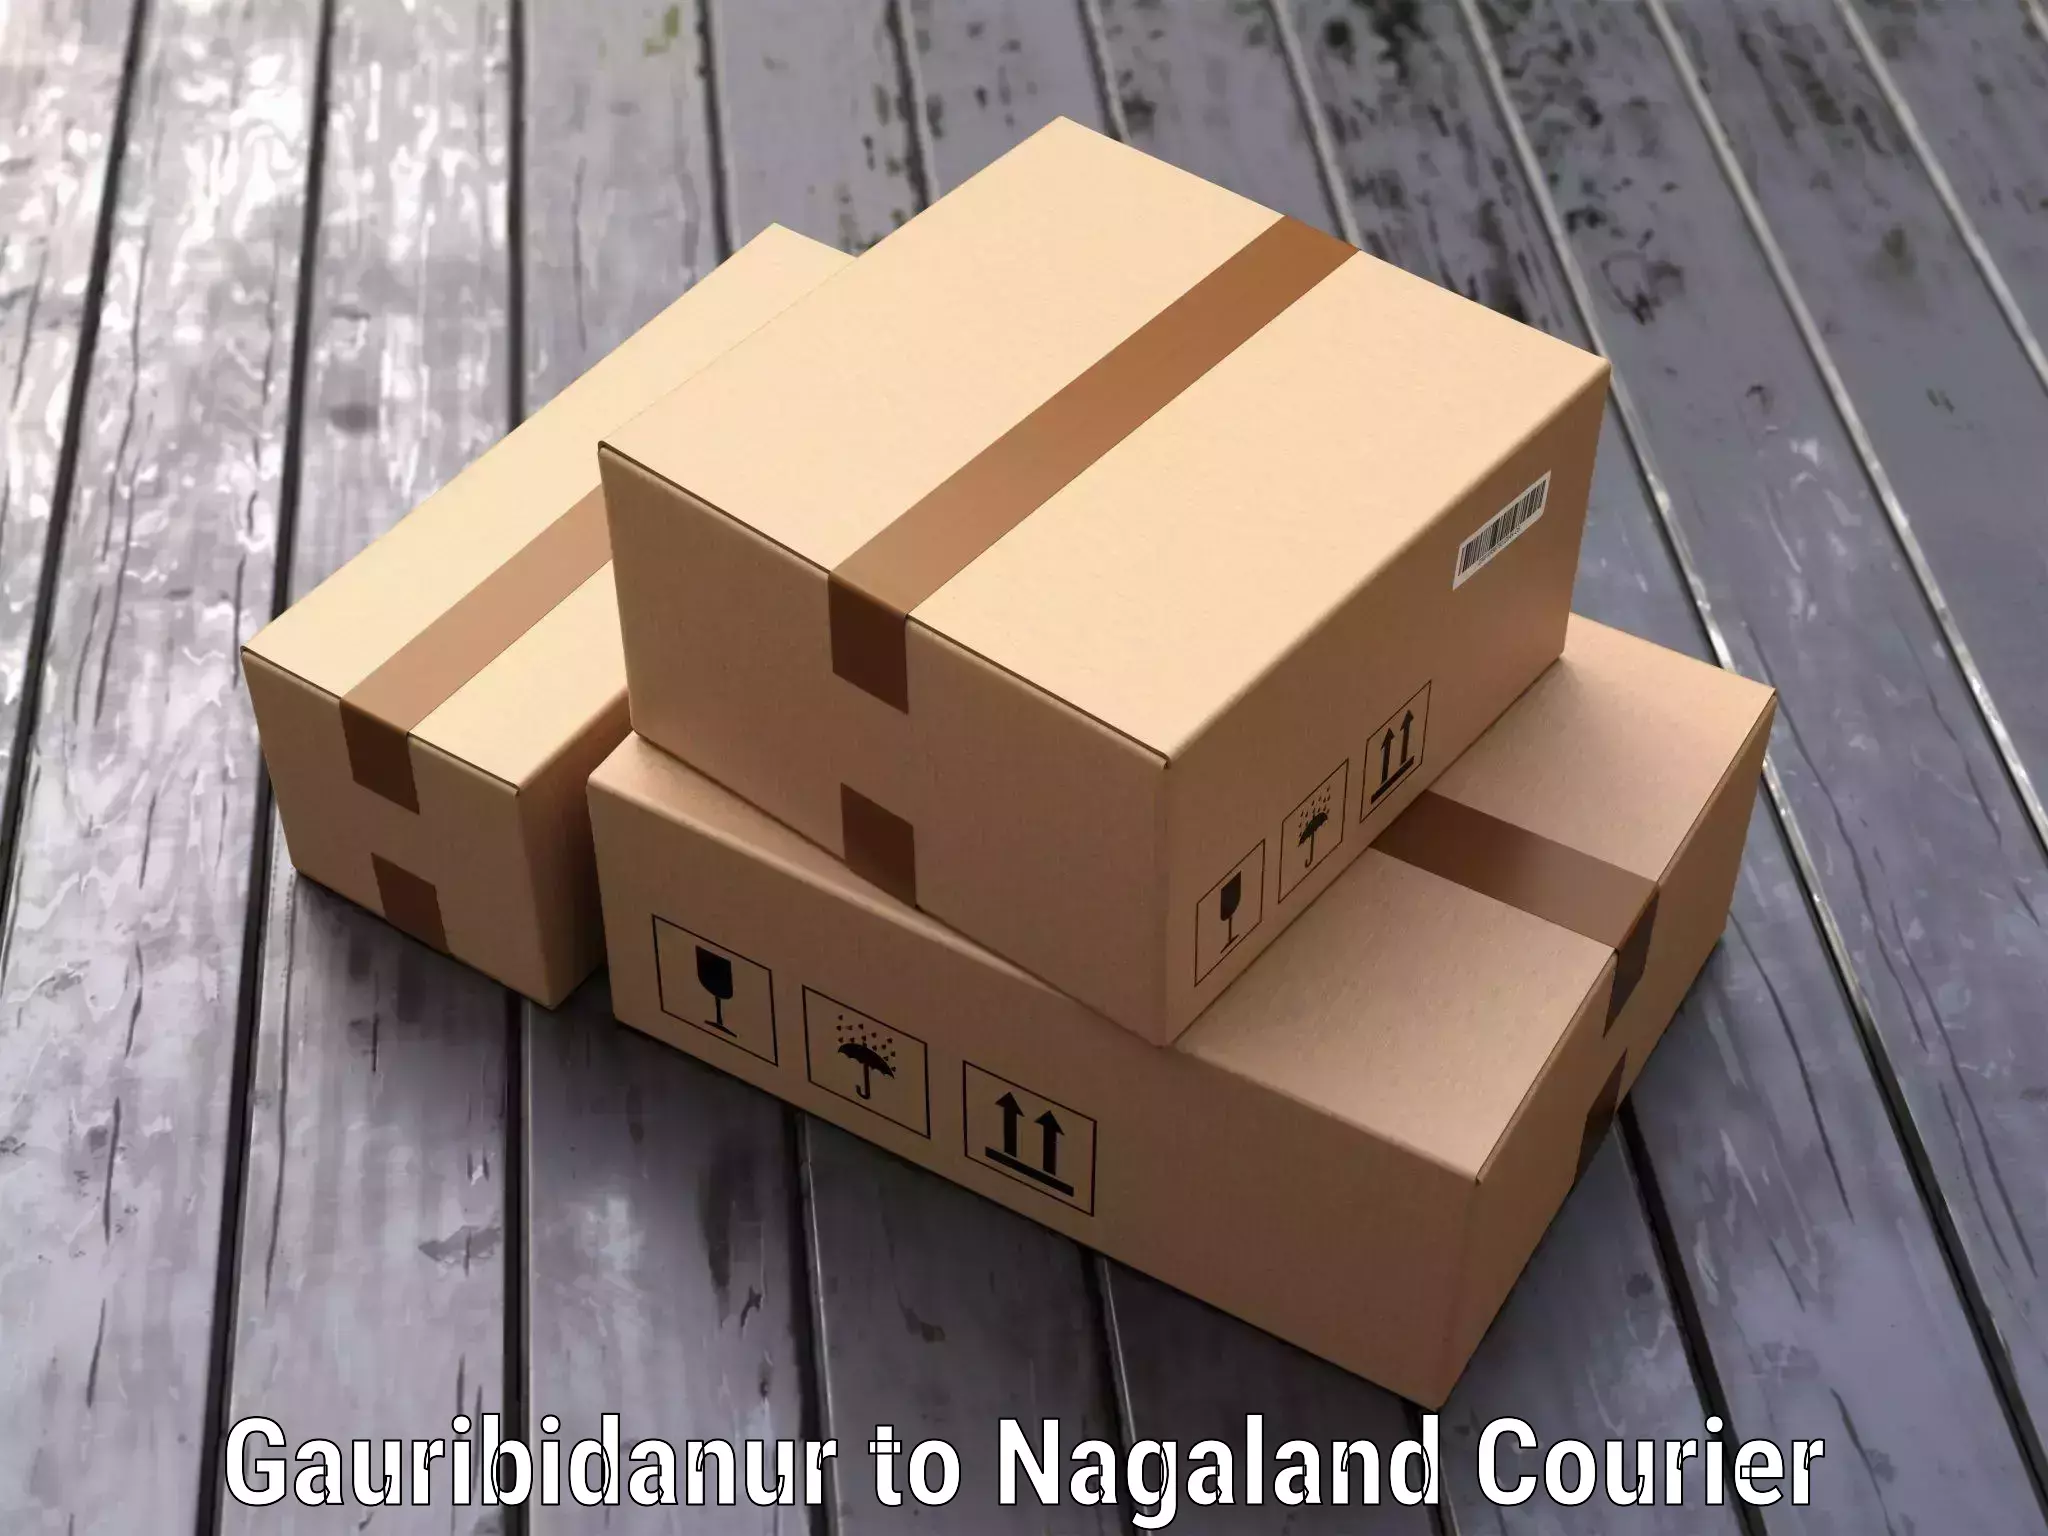 Instant baggage transport quote Gauribidanur to Nagaland